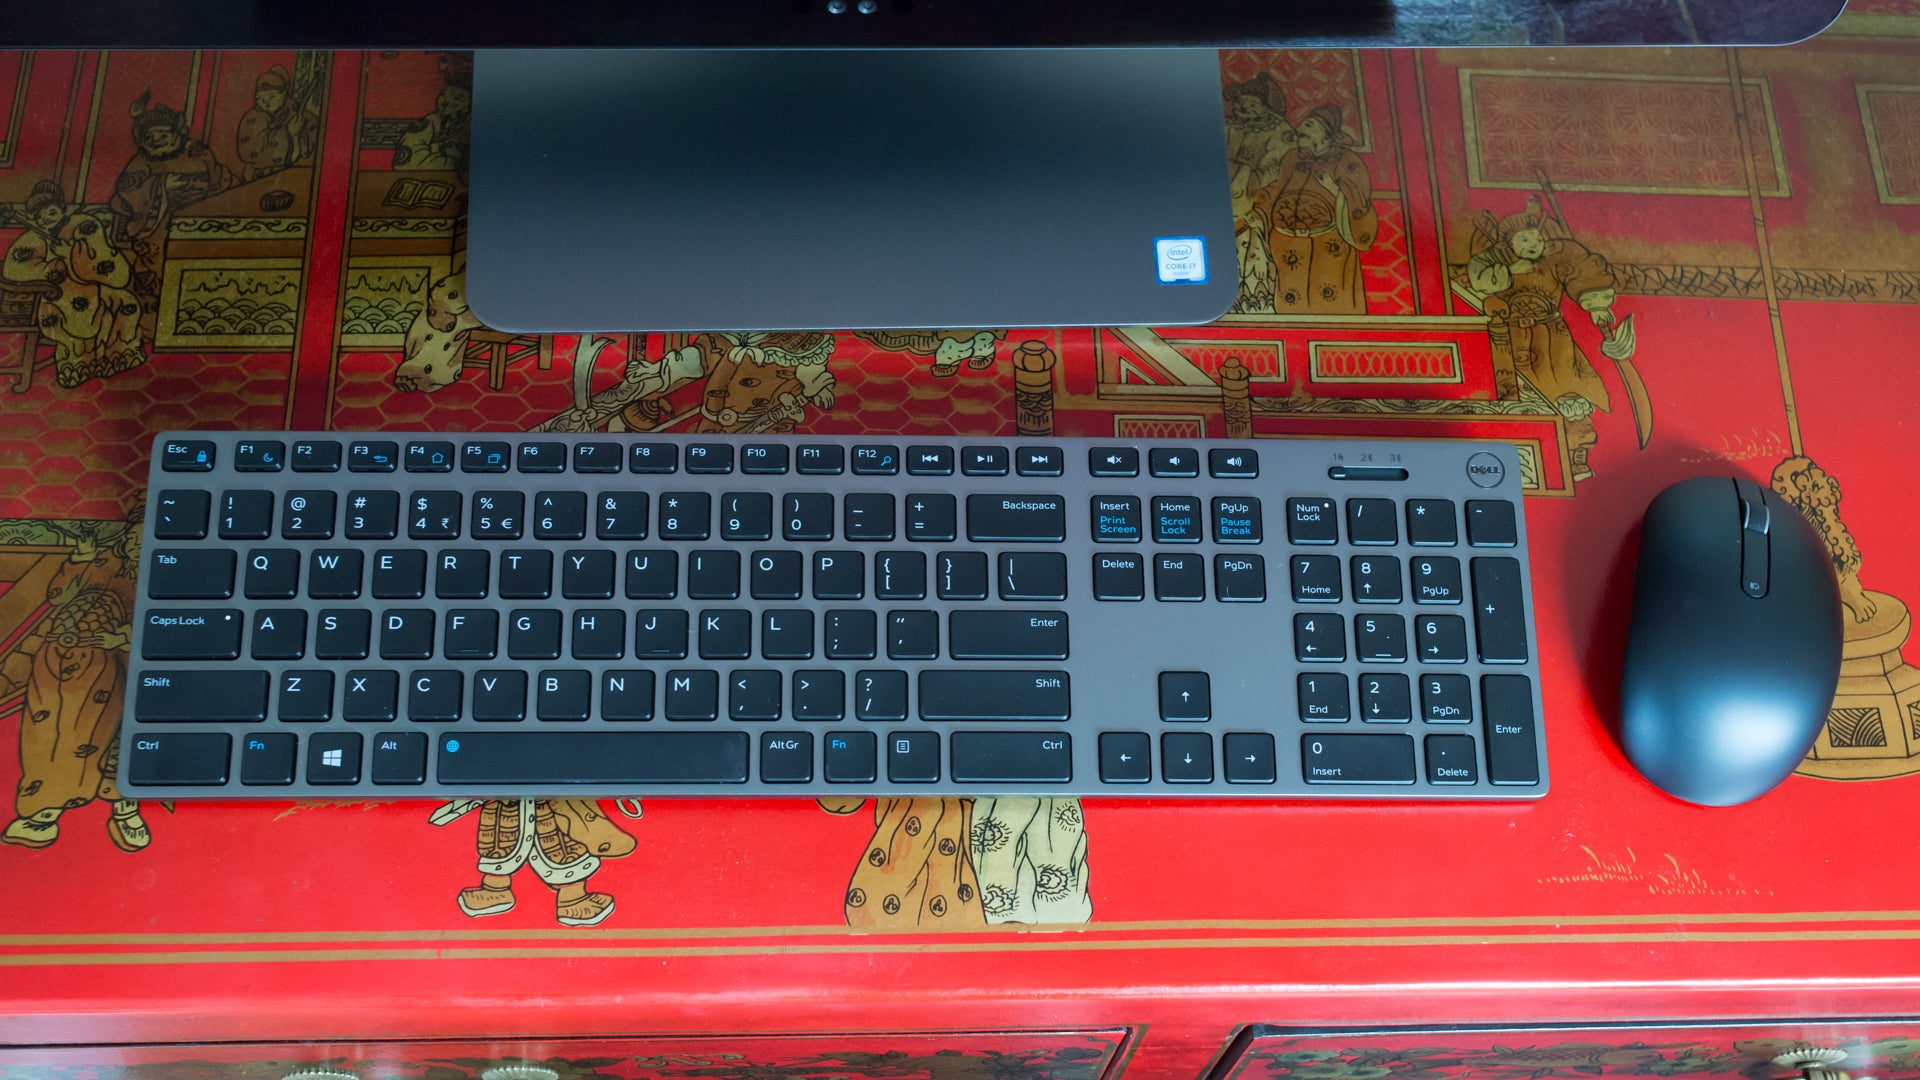 Dell keyboard and mouse on a decorative red desk.